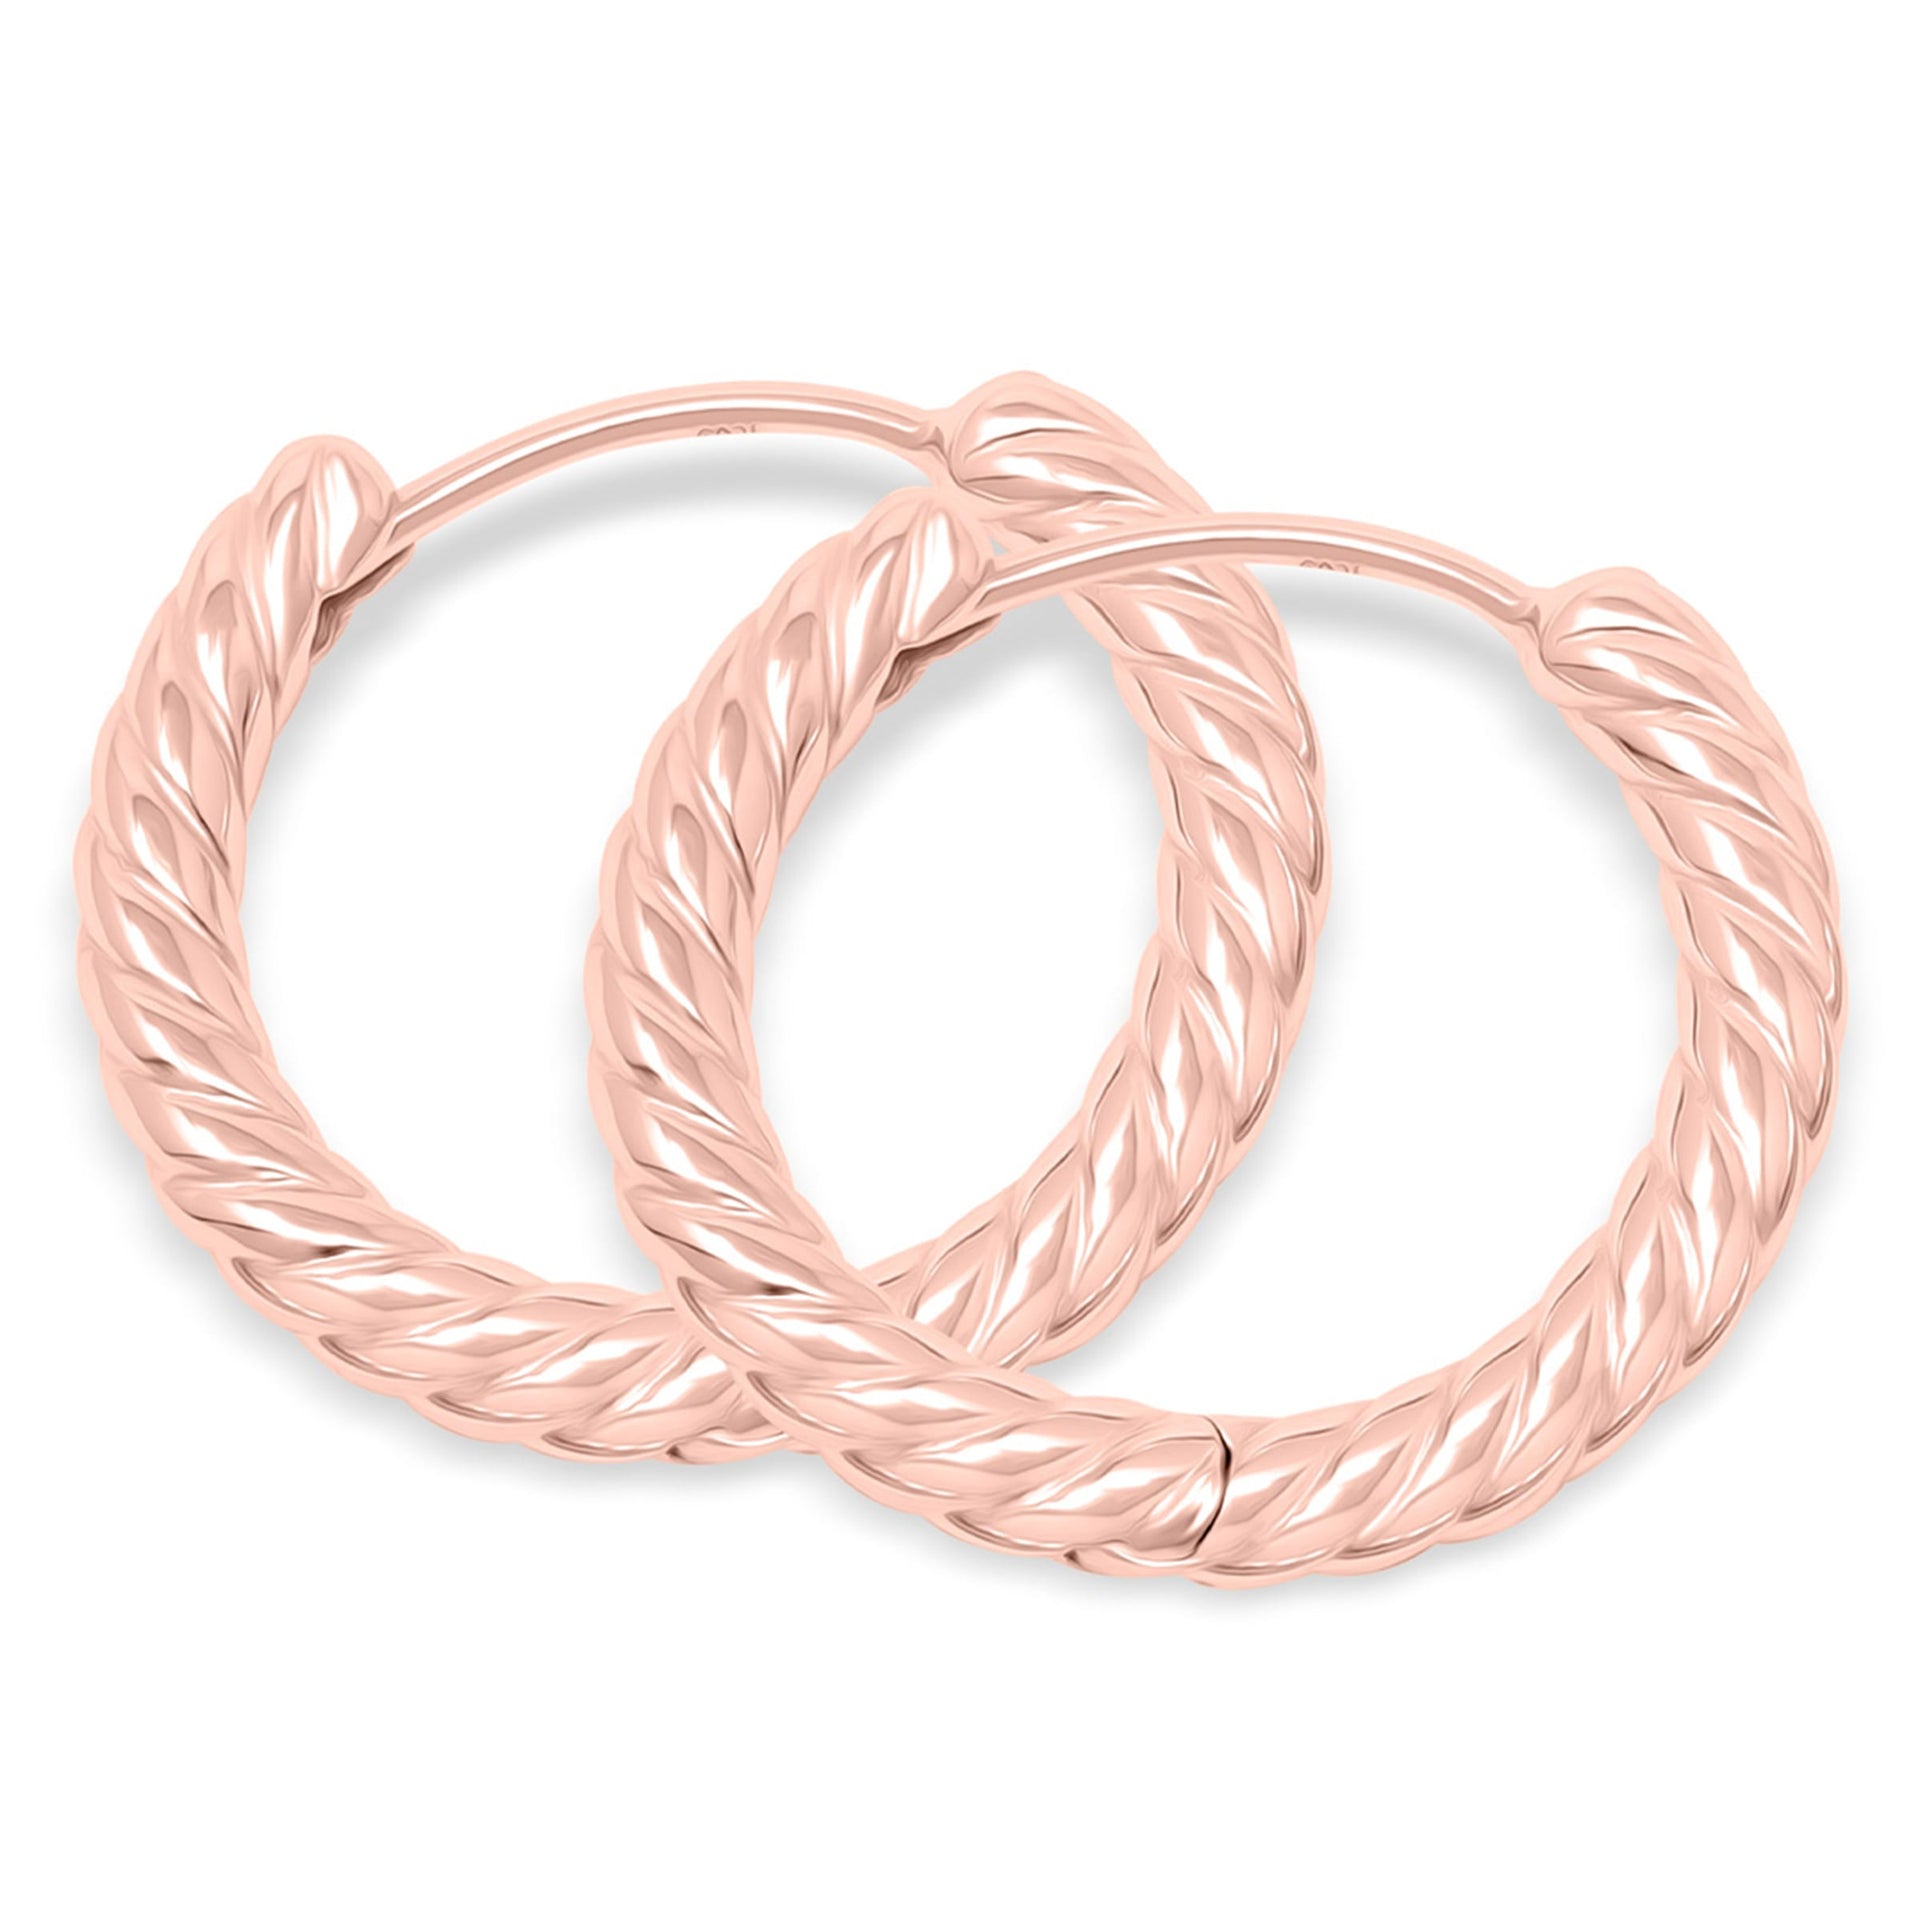 Simple twisted rose gold earrings